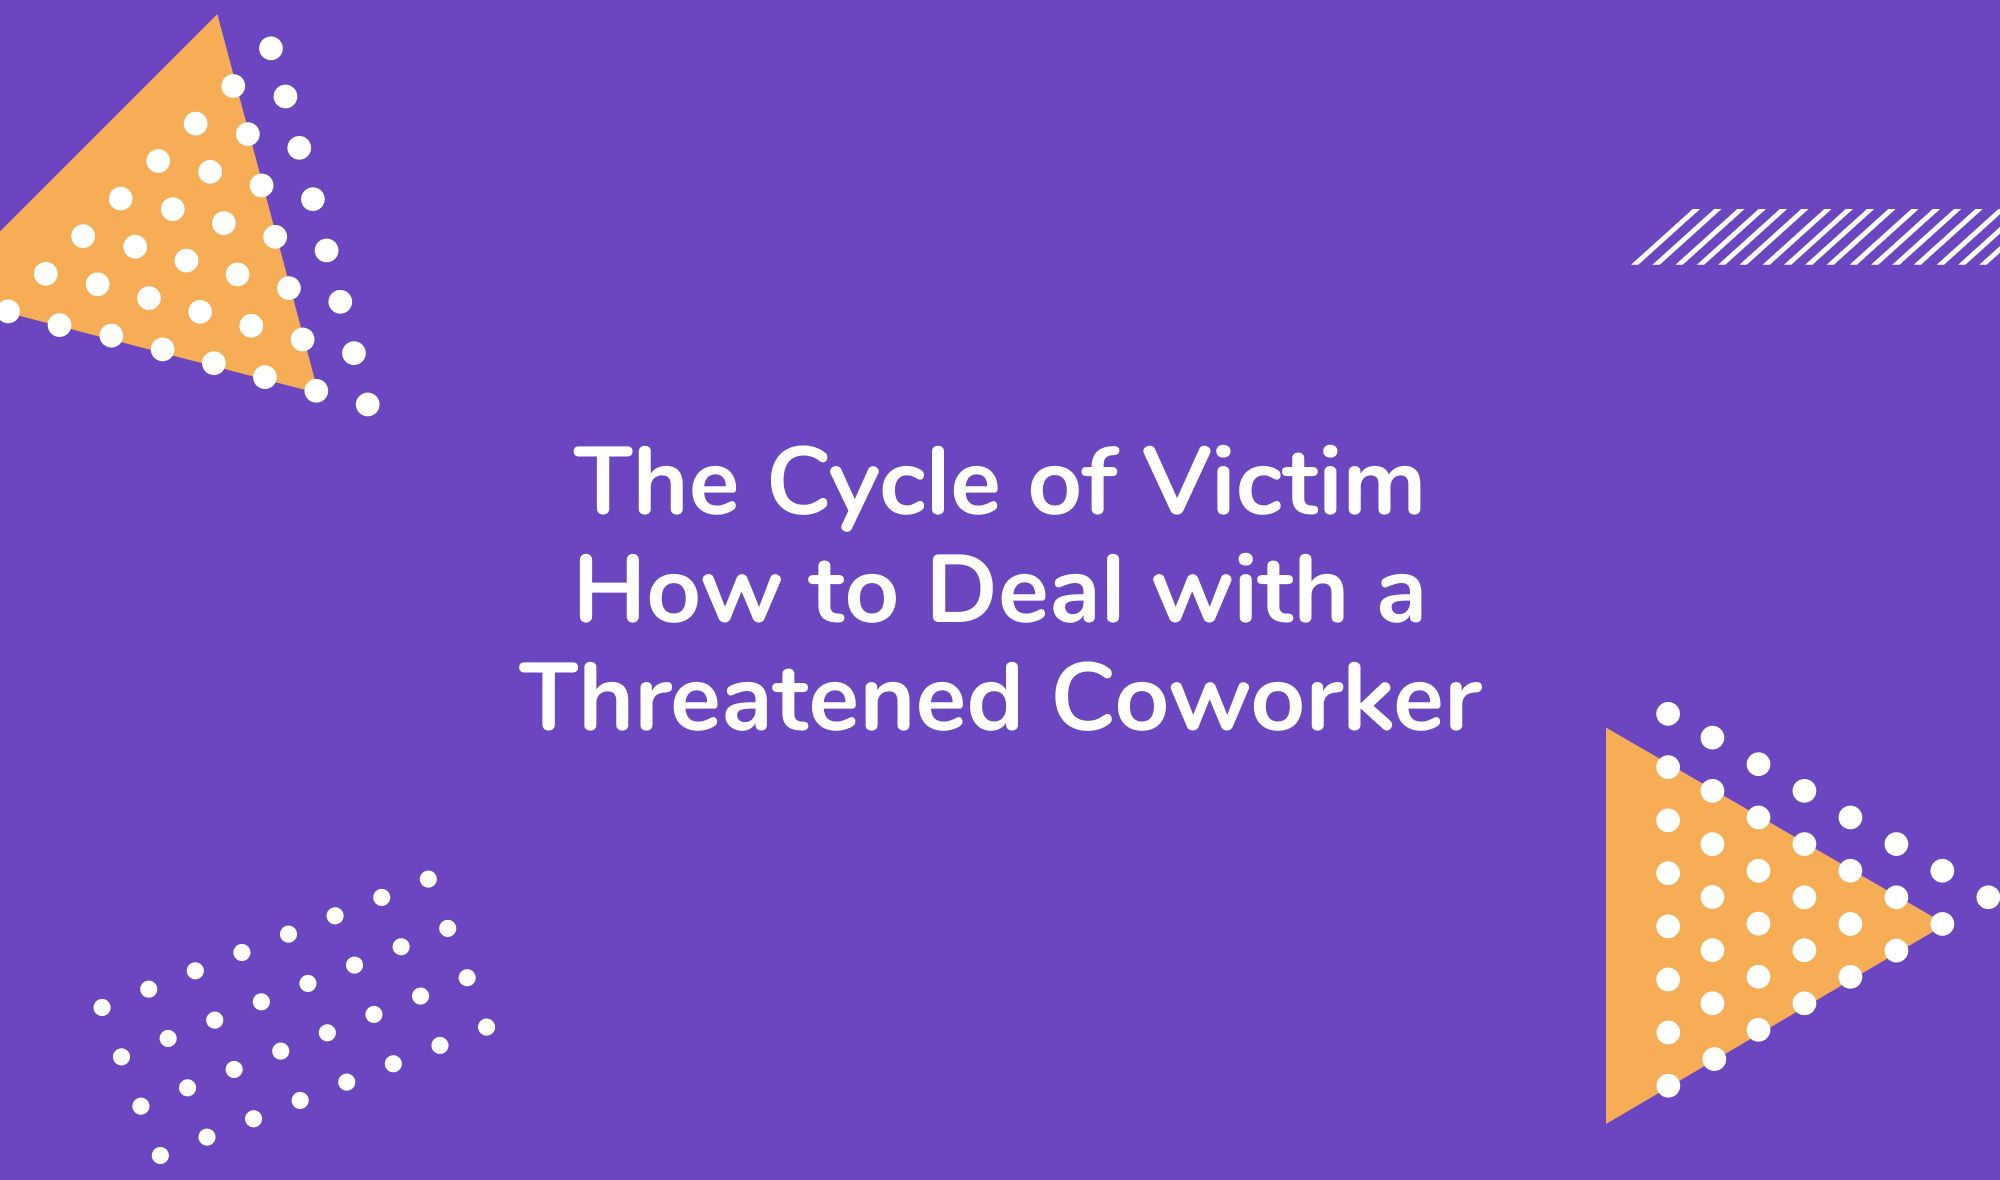 How to Deal with a Threatened Coworker